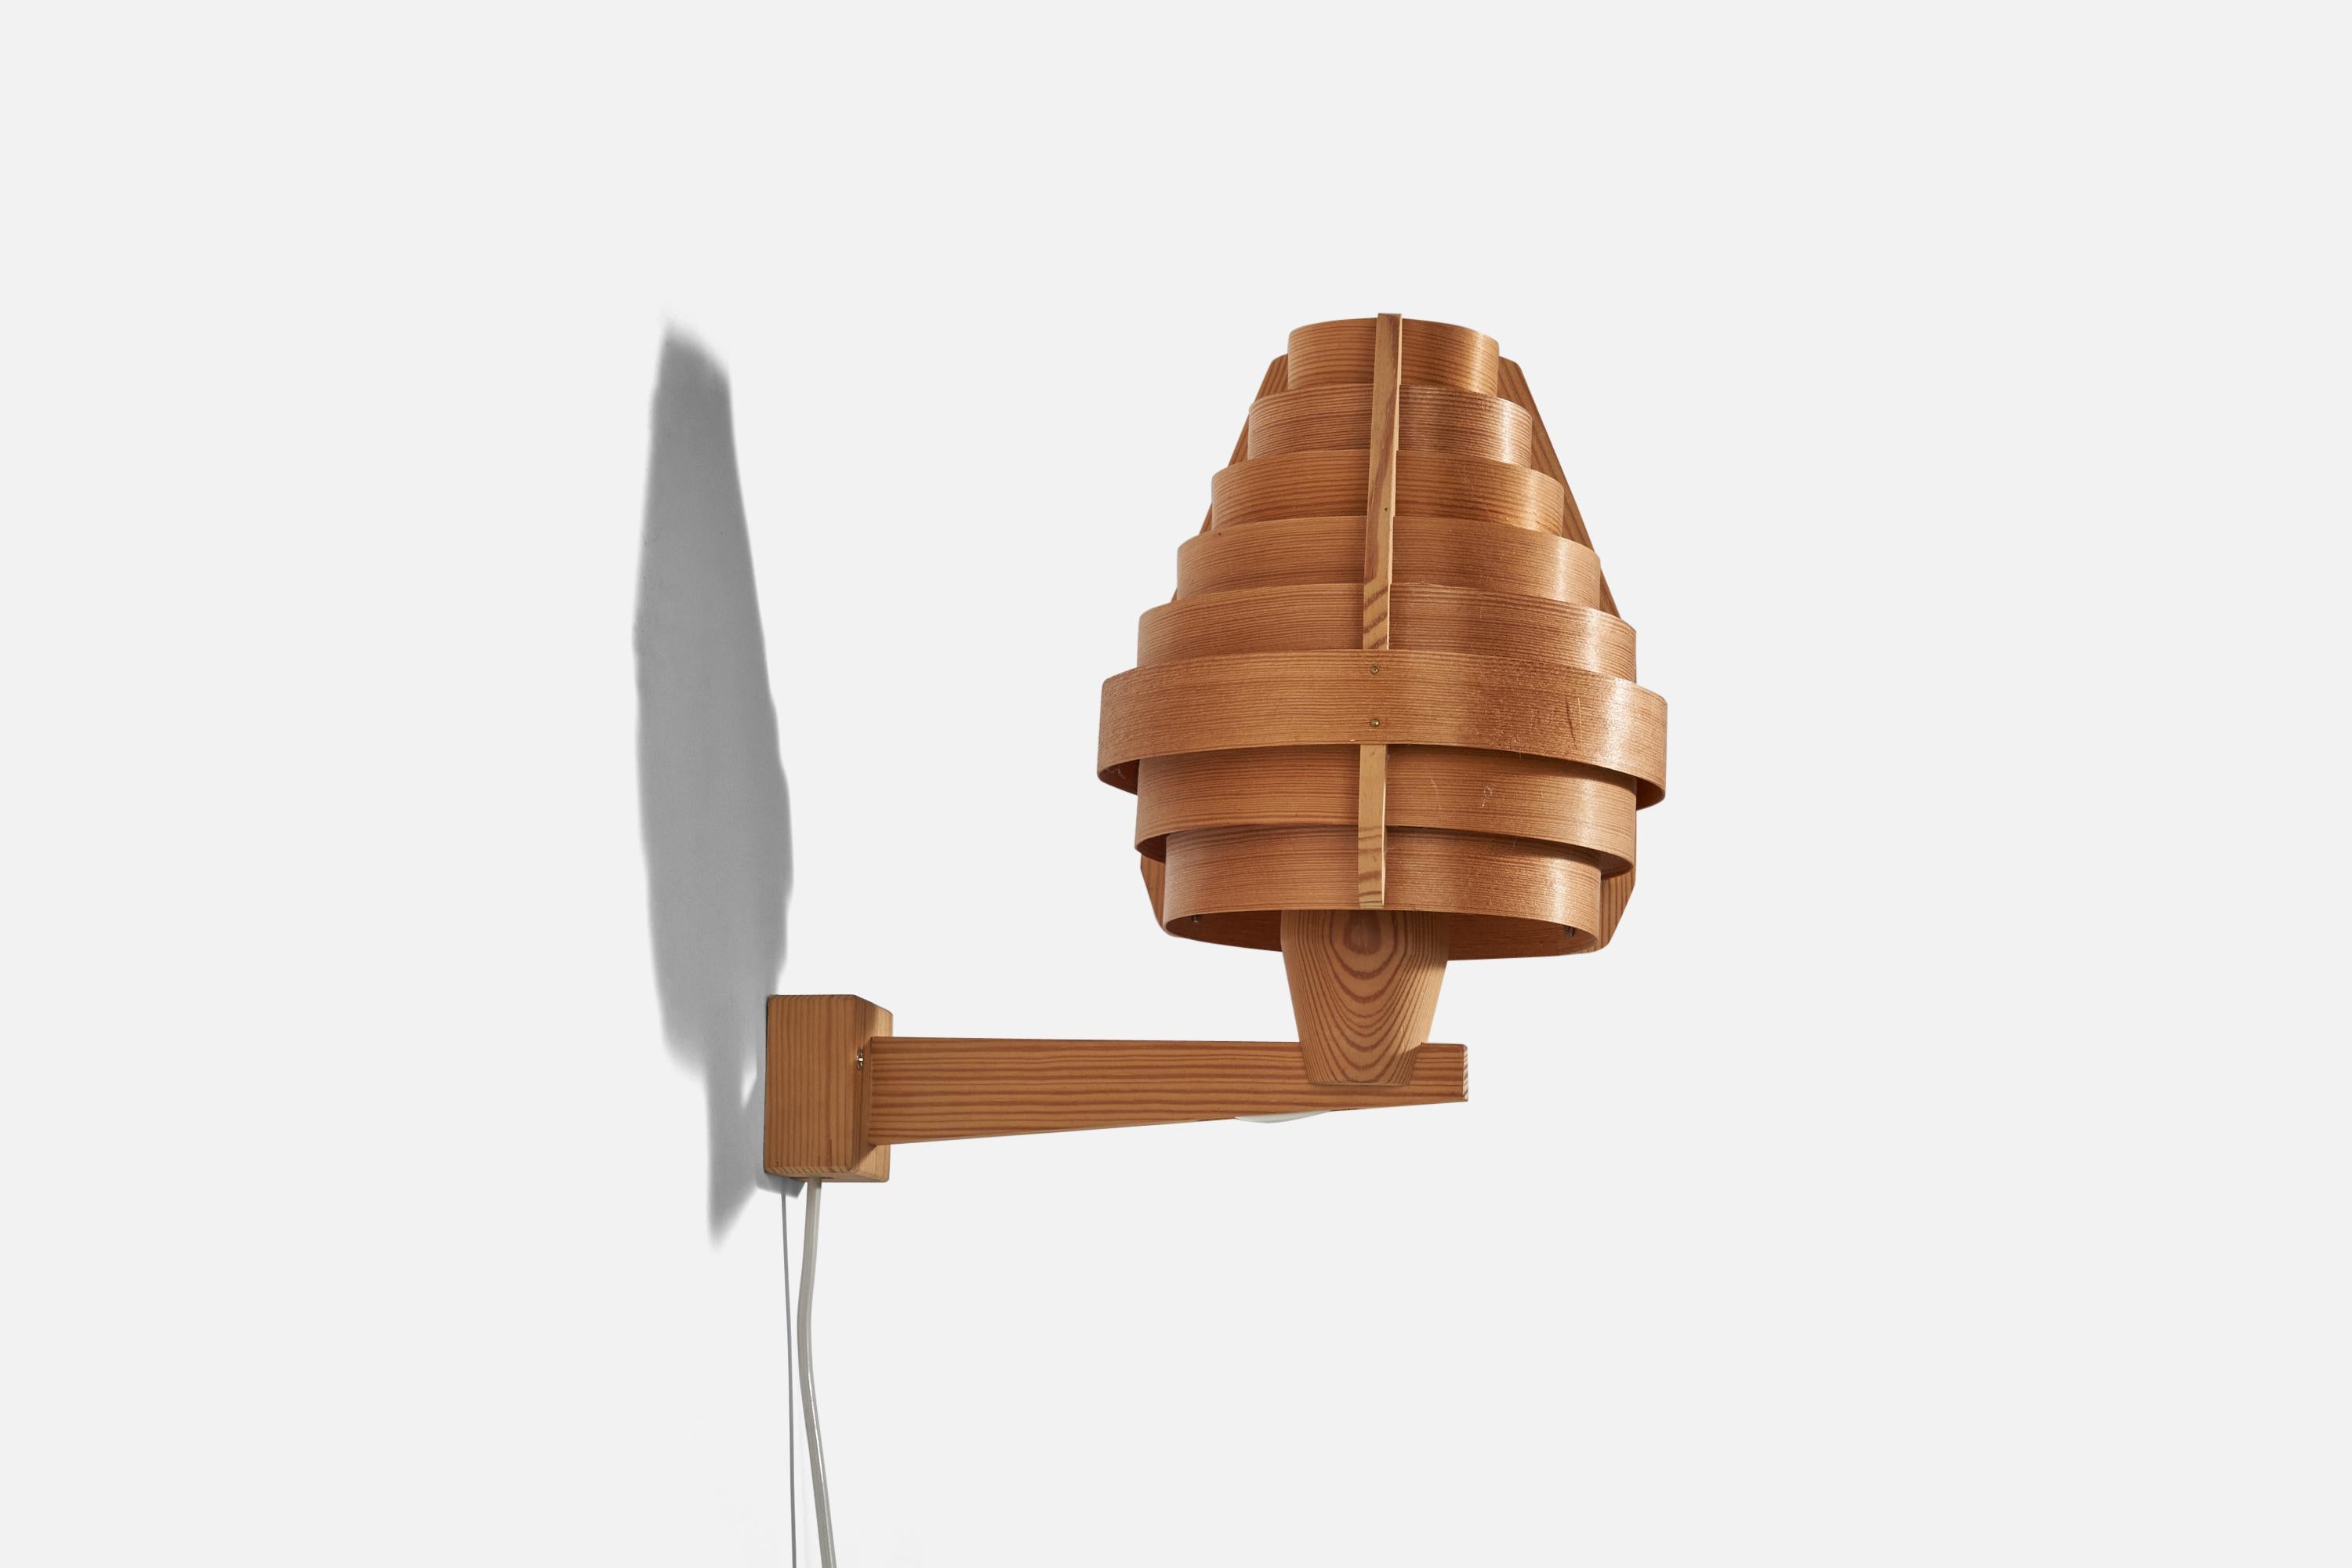 A pine and moulded pine veneer wall light designed and produced by Hans-Agne Jakobsson, Sweden. c. 1970s.

Dimensions of Back Plate (inches) : 1.97 x 1.97 x 0.98 (Height x Width x Depth)

Socket takes E-14 bulb.

There is no maximum wattage stated